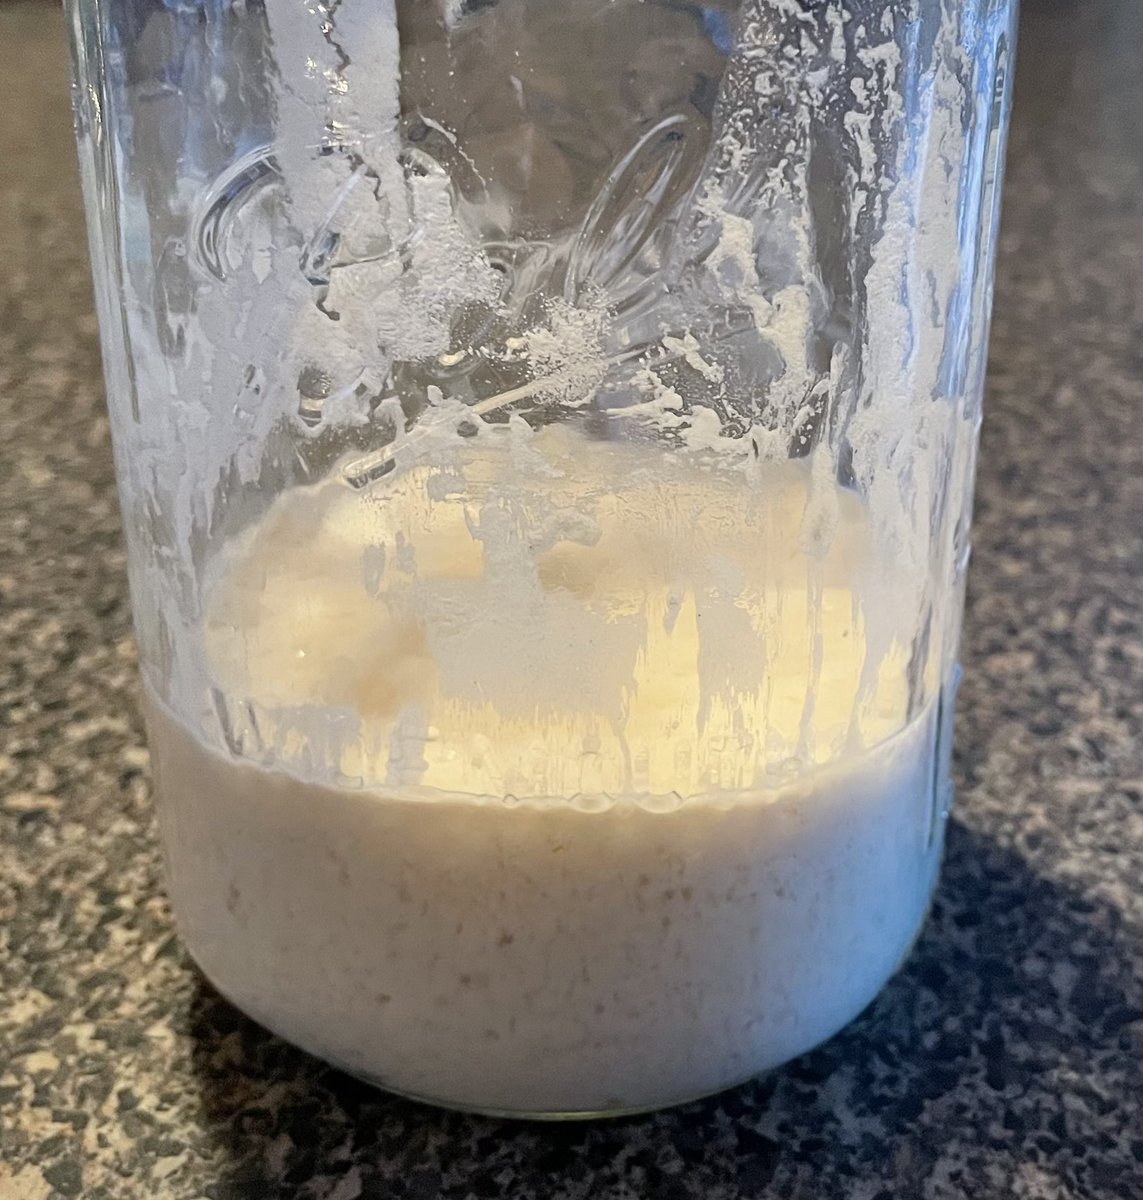 Day 2 starter no yeast looking good. 1/2 cup flour & 1/2 cup warm water stir cover loosely. Show more tomorrow. Great for grid down if no yeast available.